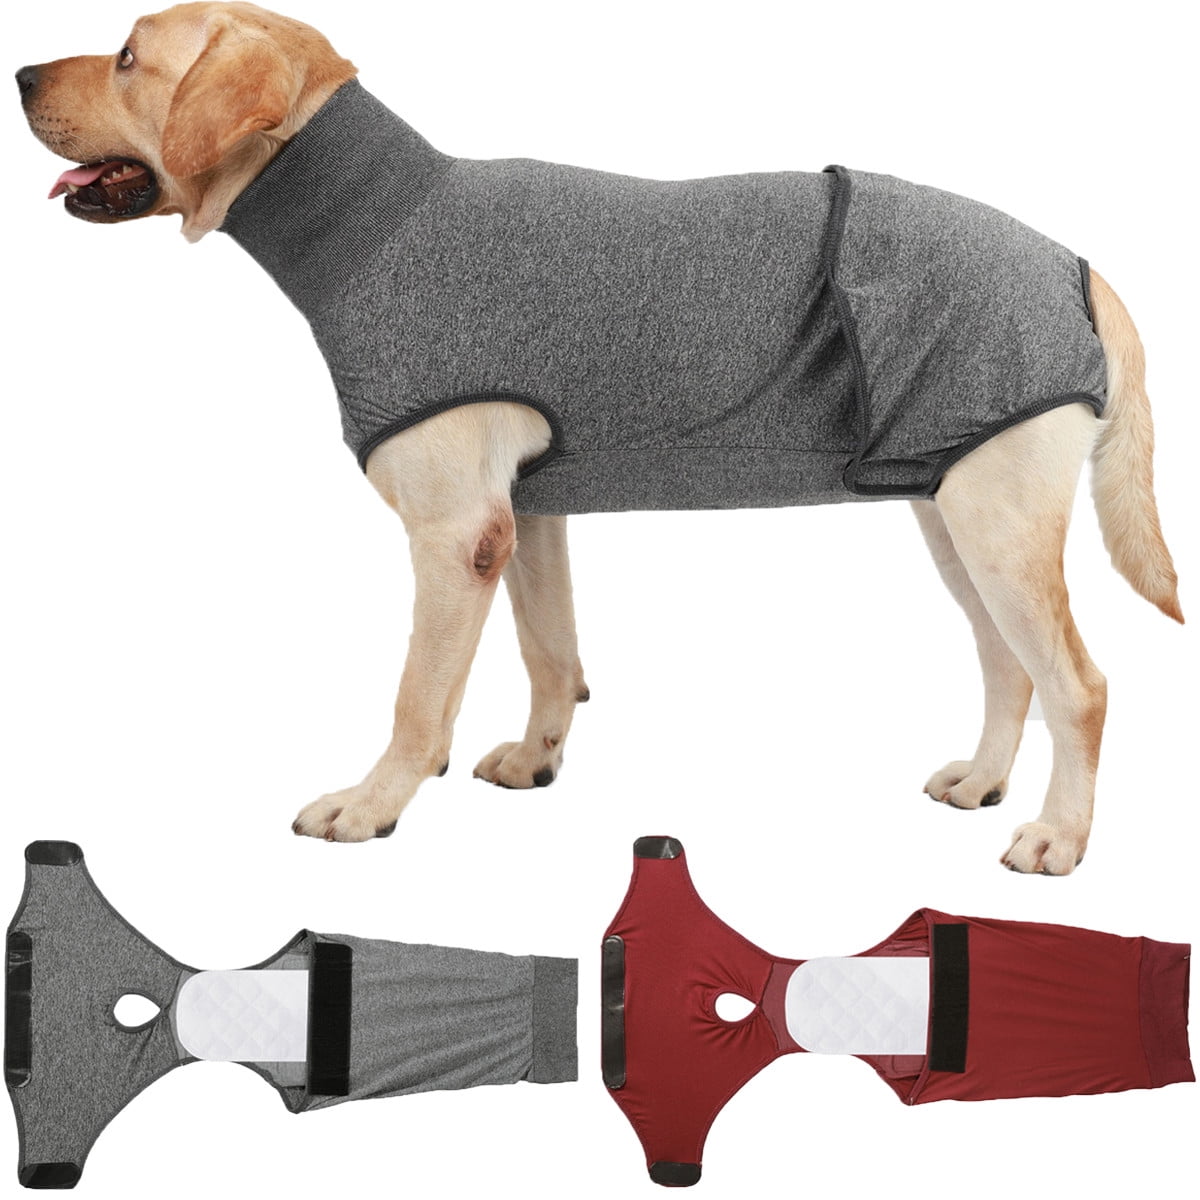 Pet Enjoy Recovery Suit for Dogs After Surgery, Recovery Shirt for Male ...